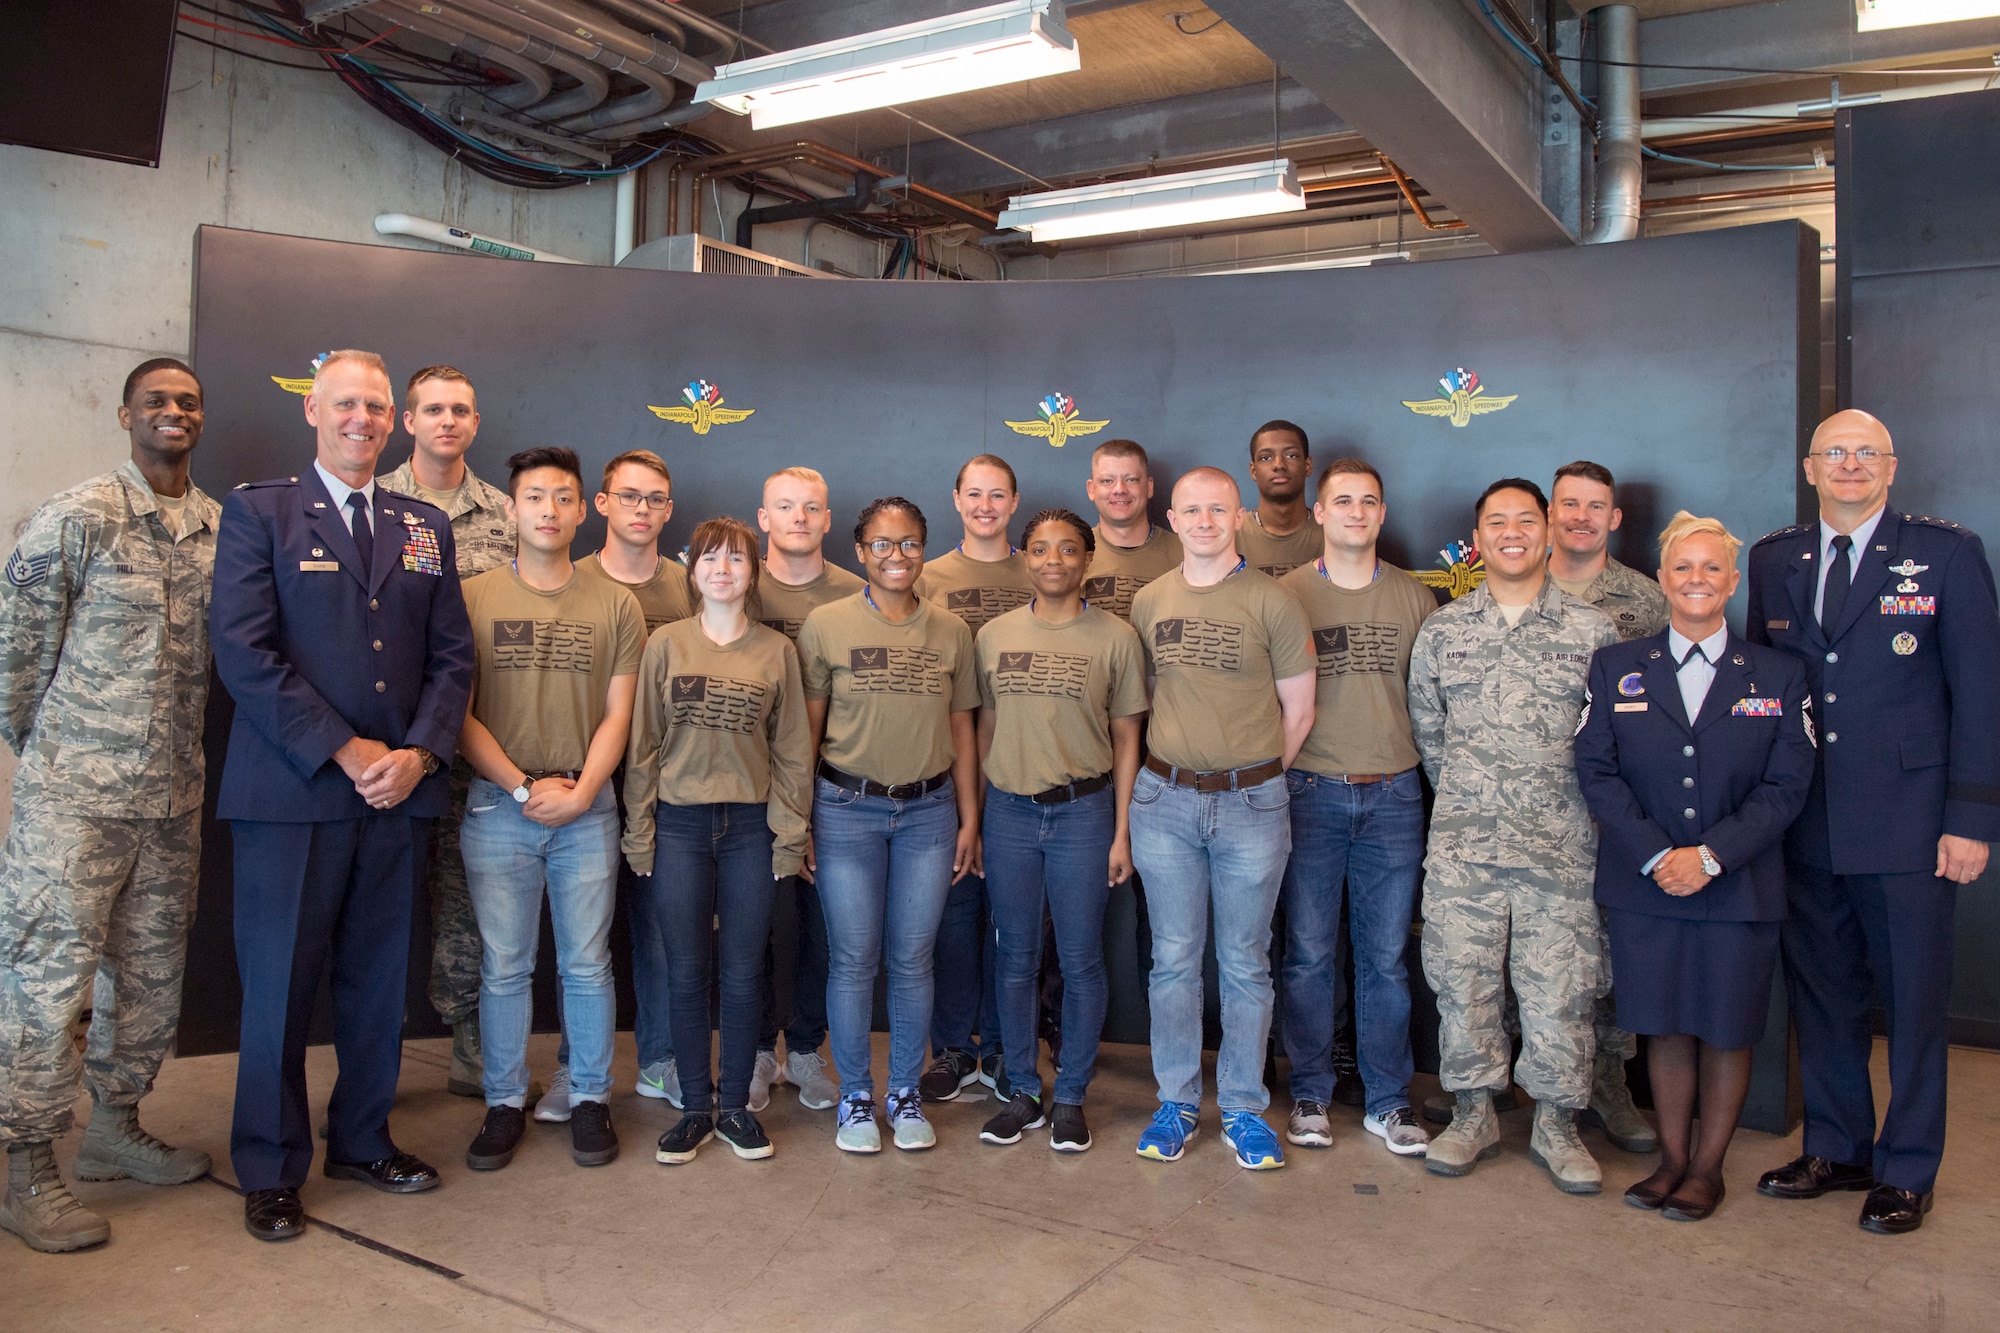 Trainees and leadership from the 434th Air Refueling Wing at Grissom Air Reserve Base, Indiana pose for a photo following a mass enlistment ceremony at the Indianapolis Motor Speedway May 19, 2019. The ceremony included recruits from all branches of services throughout the state of Indiana. (U.S. Air Force photo/Master Sgt. Ben Mota)